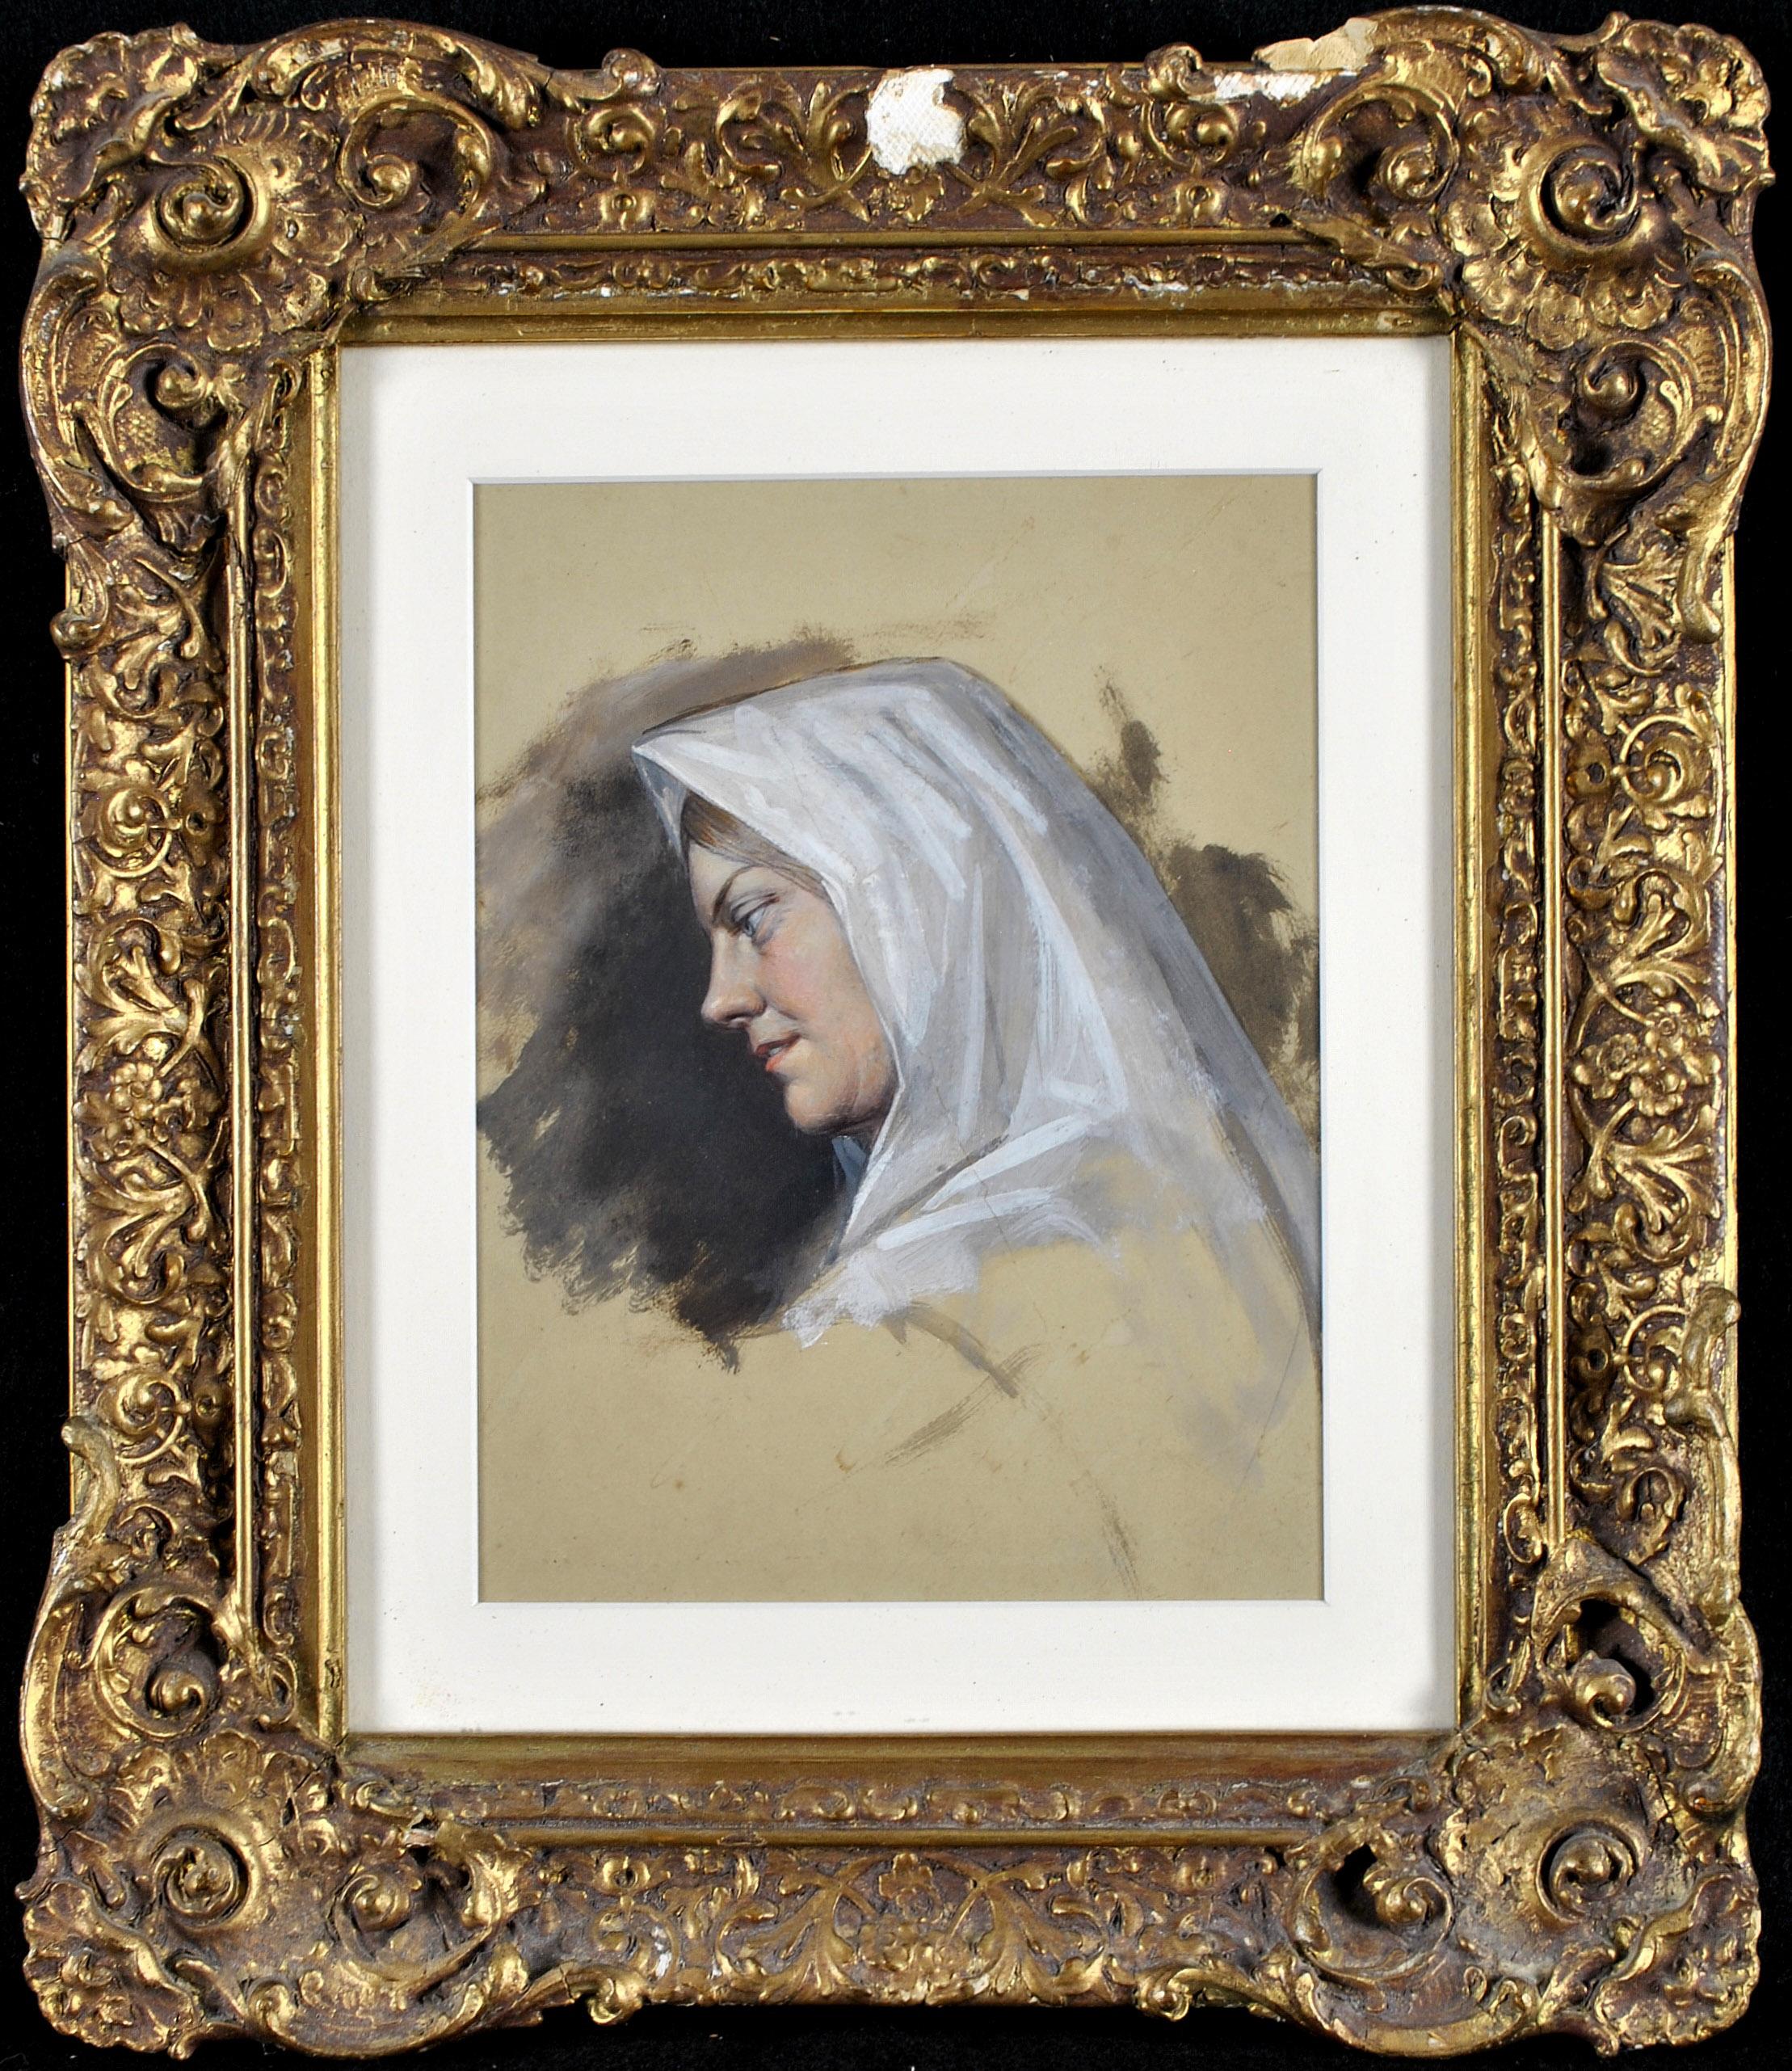 Lady in a White Shawl - 19th Century British Gouache Portrait Painting